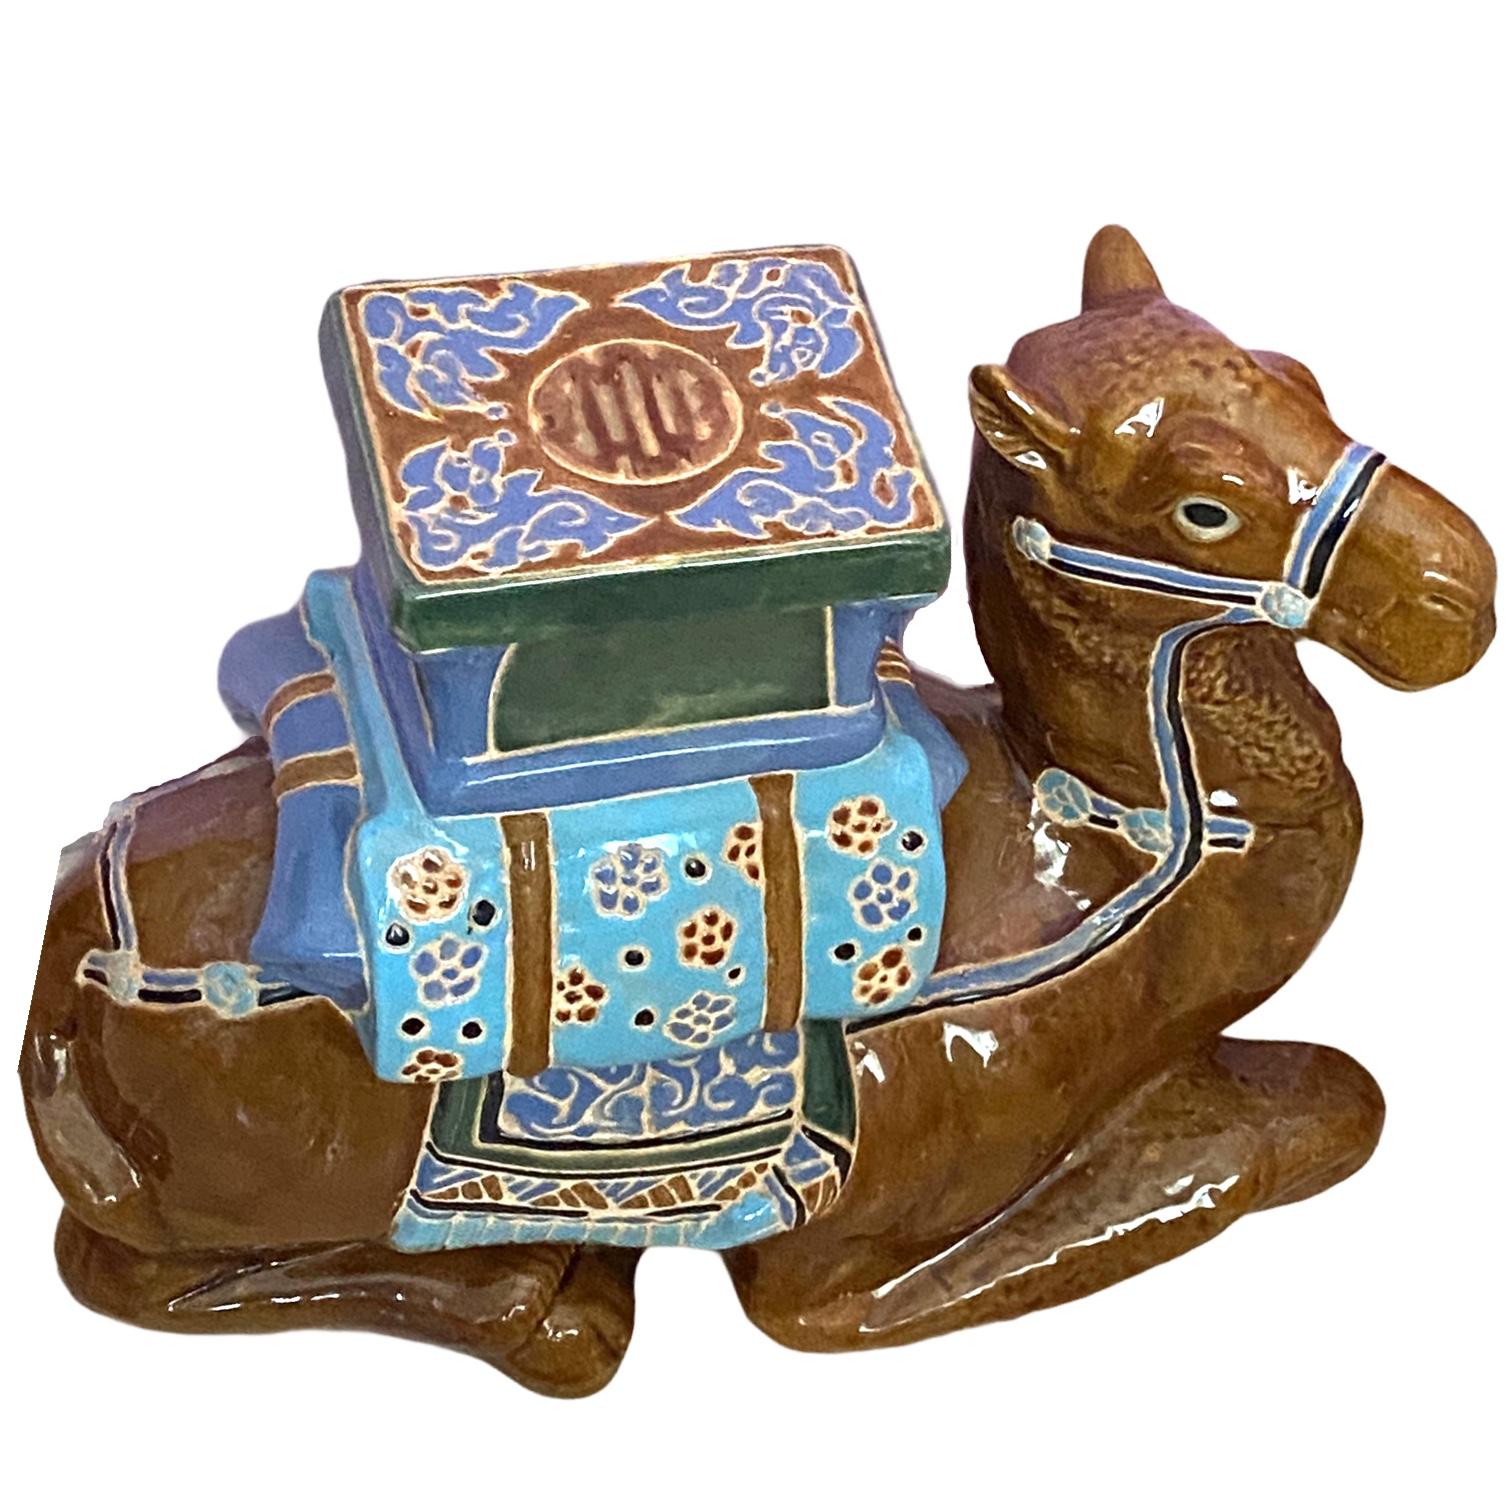 Mid-20th century glazed ceramic camel garden stool, flower pot seat or side table. Handcrafted ceramic. Nice addition to your home, patio or garden area.
 